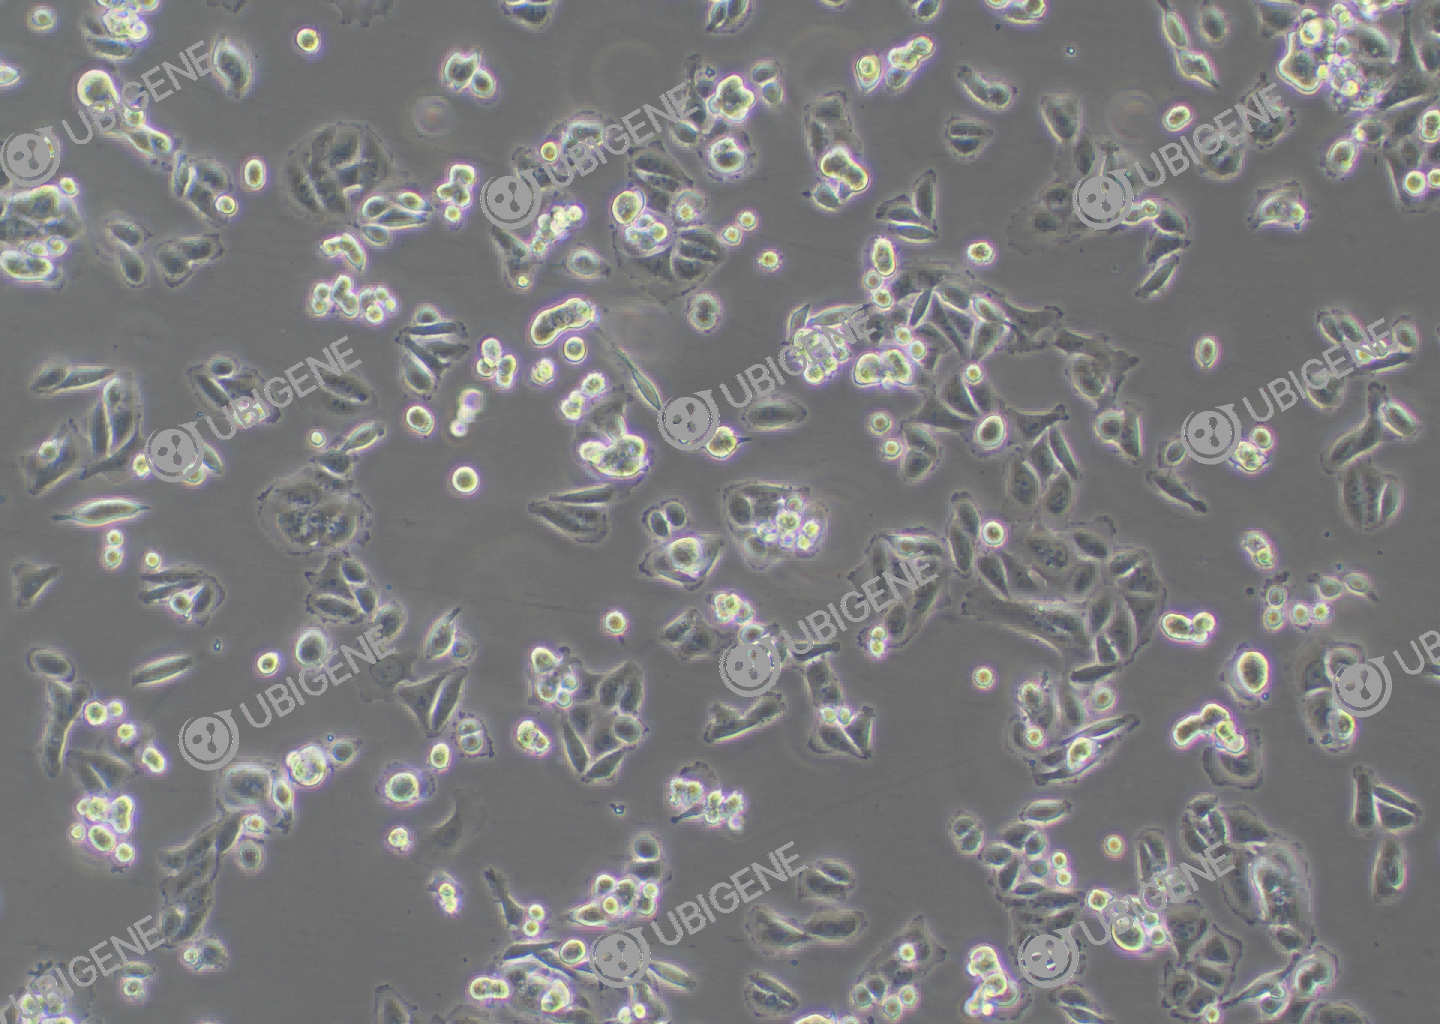 SW480 cell line Cultured cell morphology